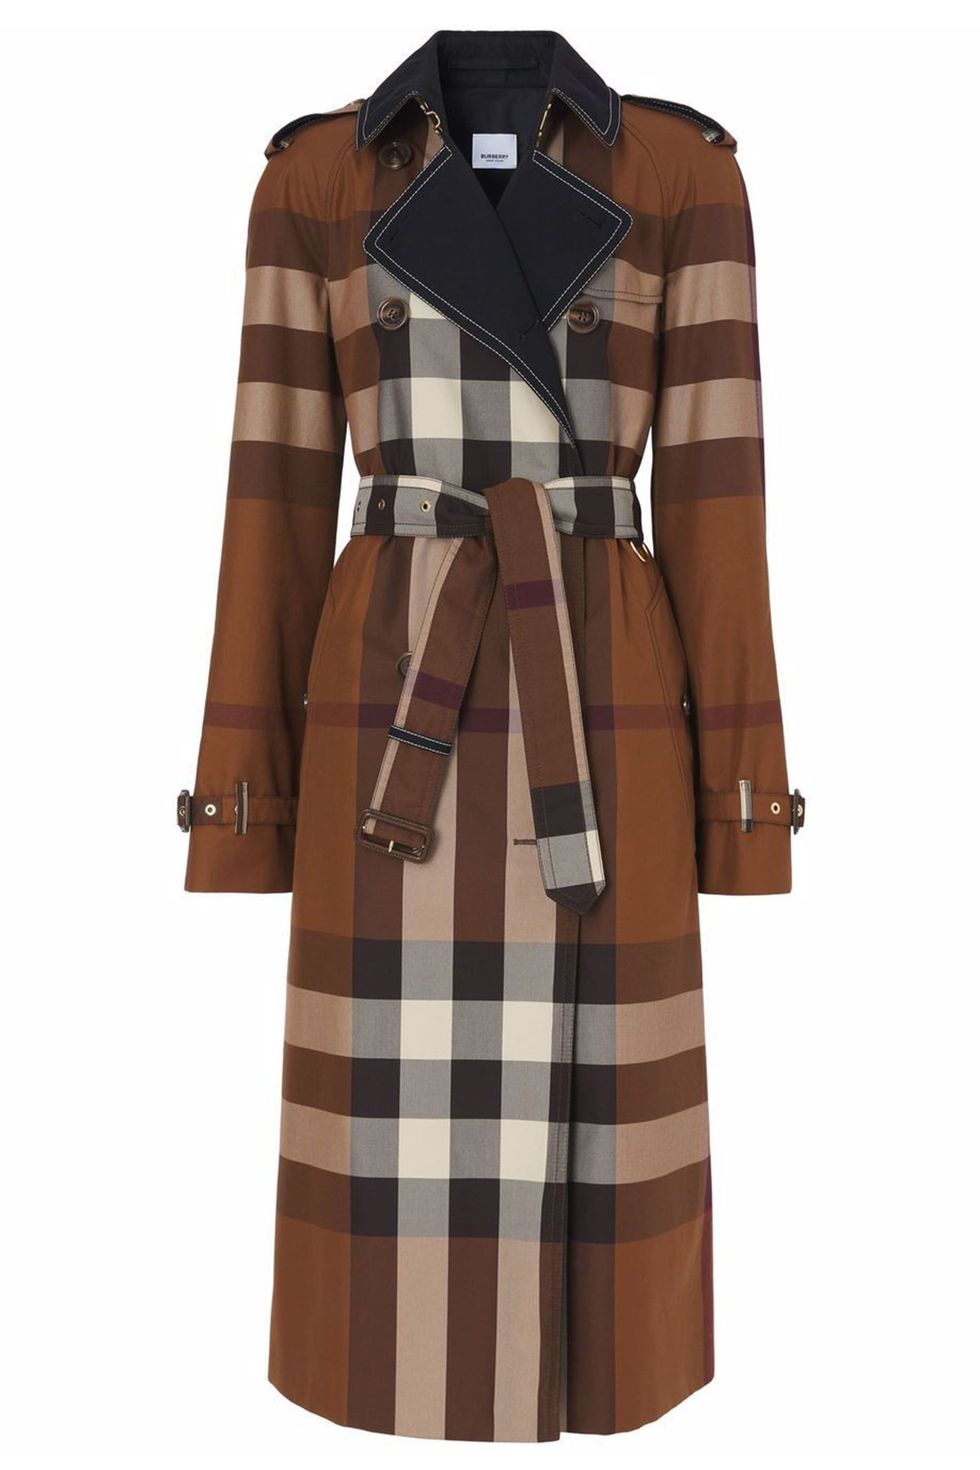 Fashion and History: The Burberry Trench Coat and the